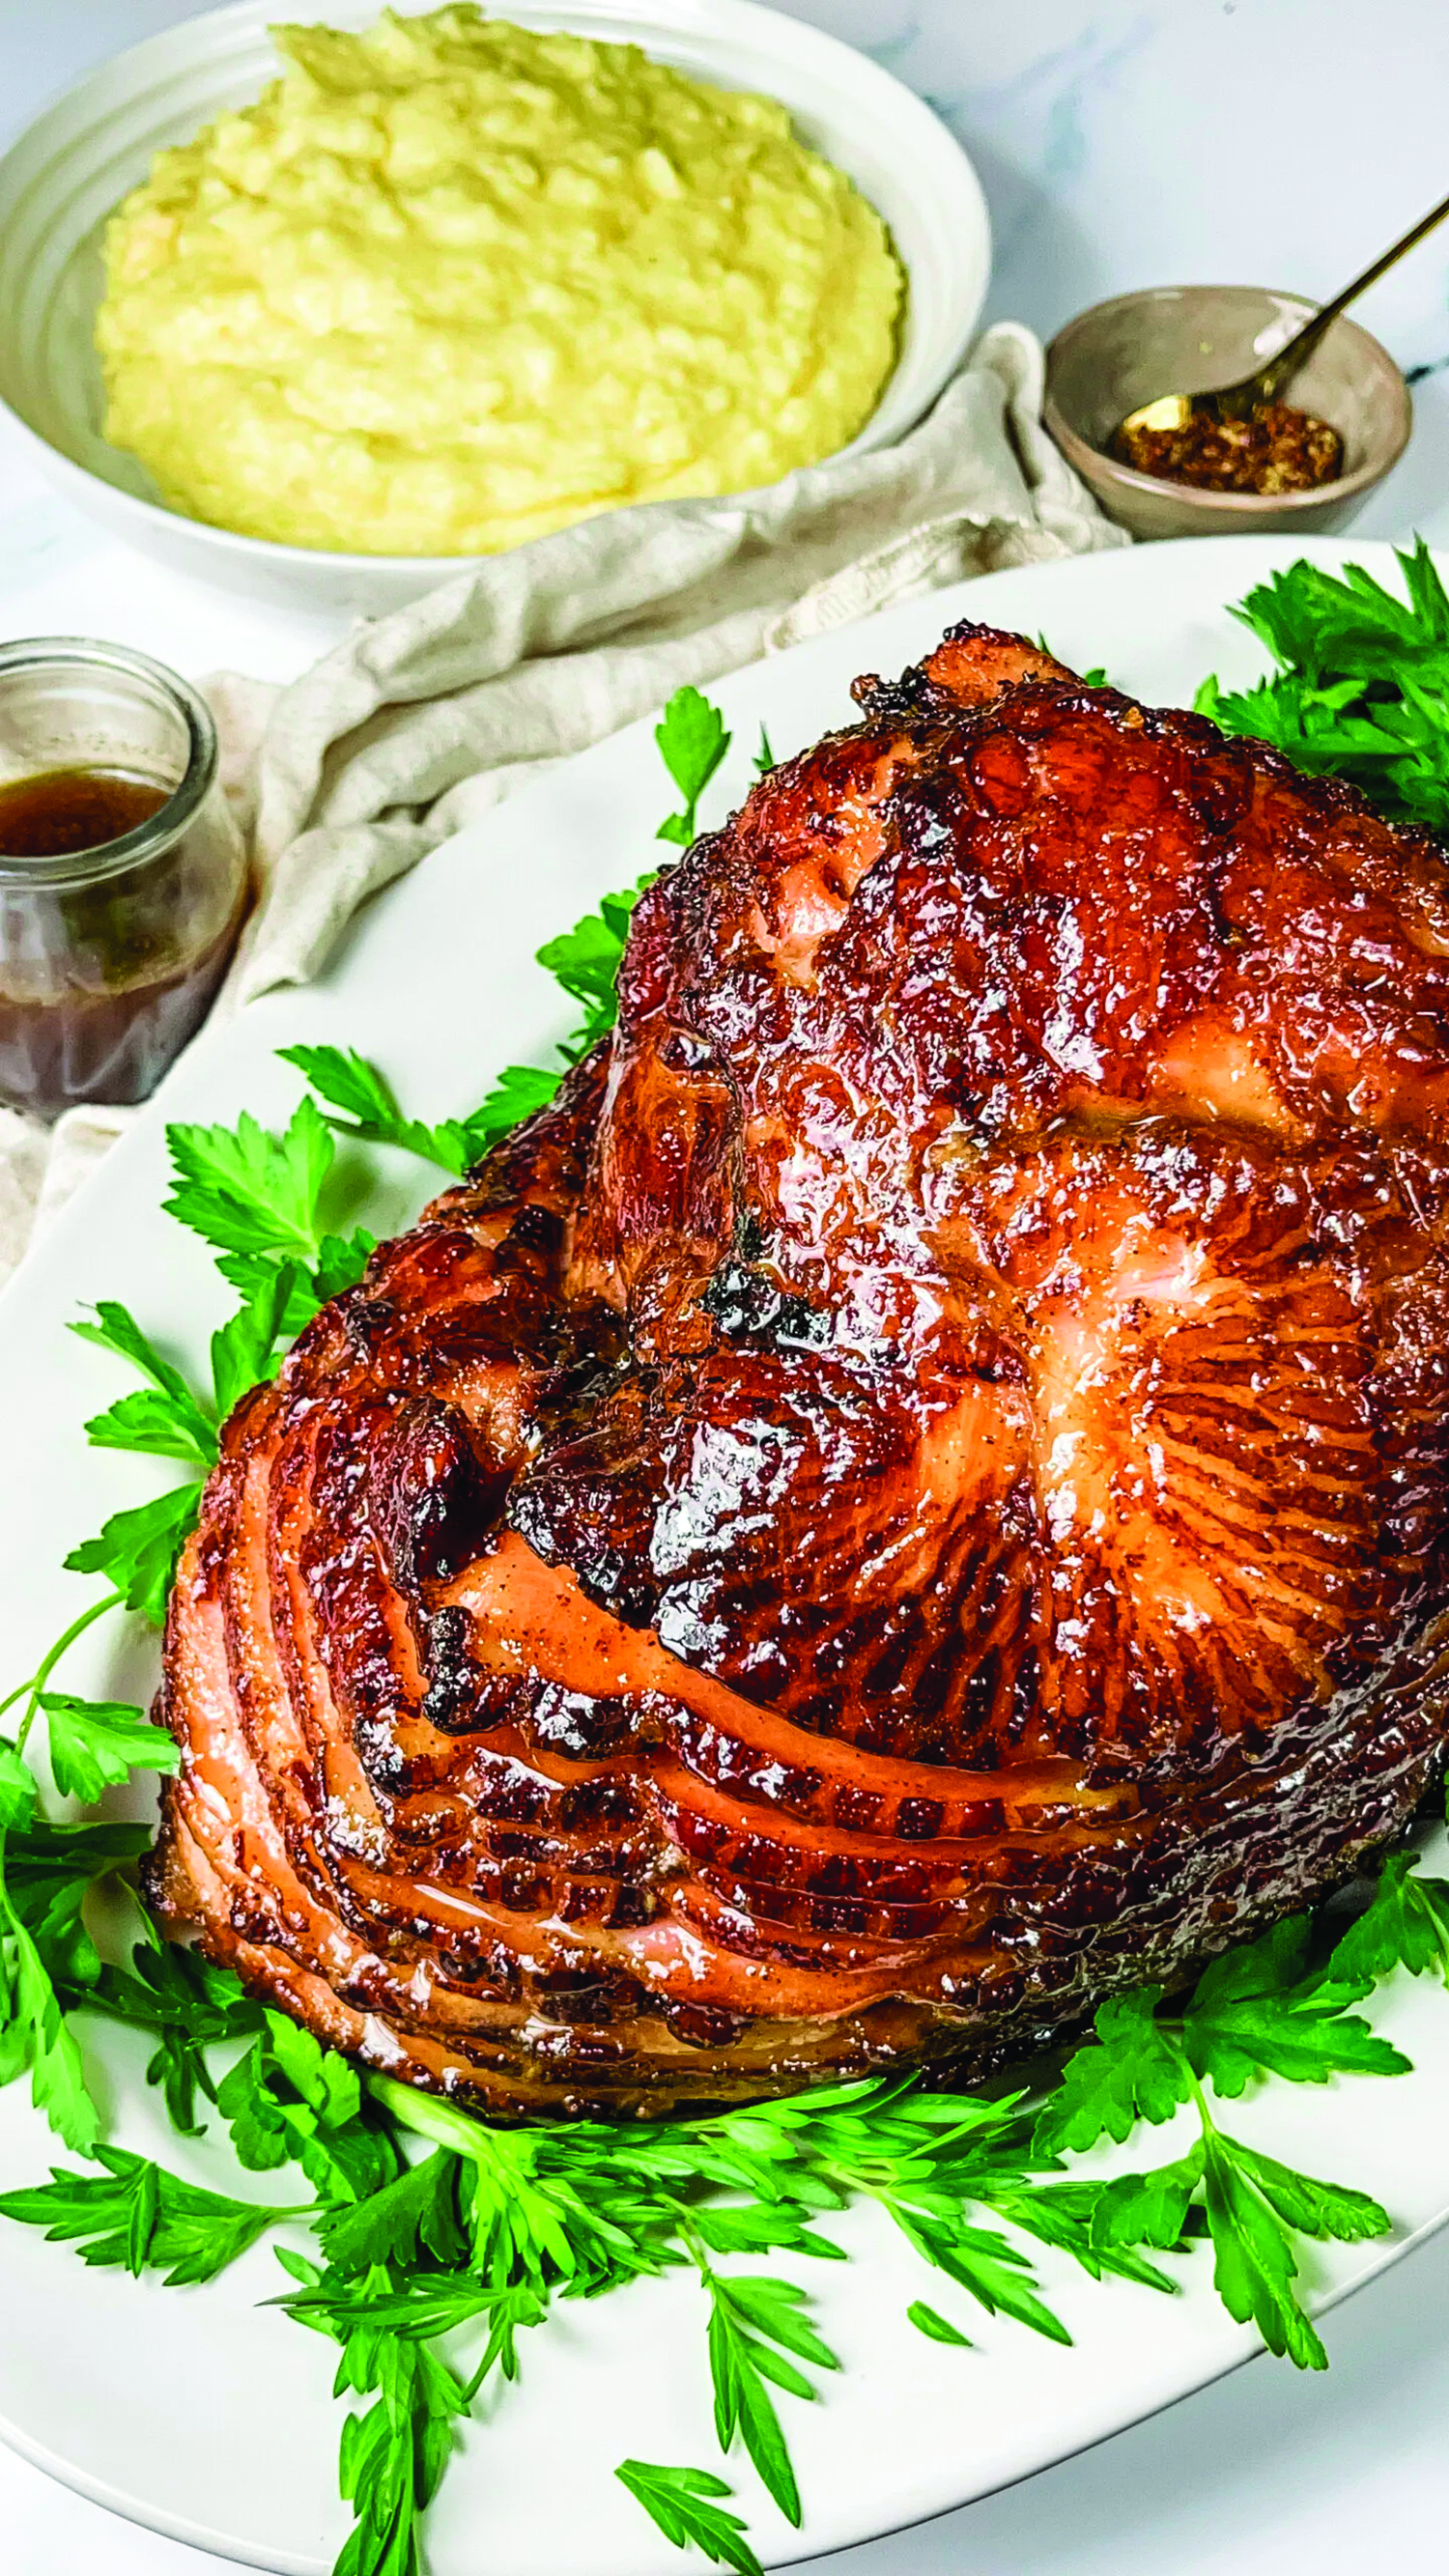 Hosting Advice for a Perfect Holiday Ham